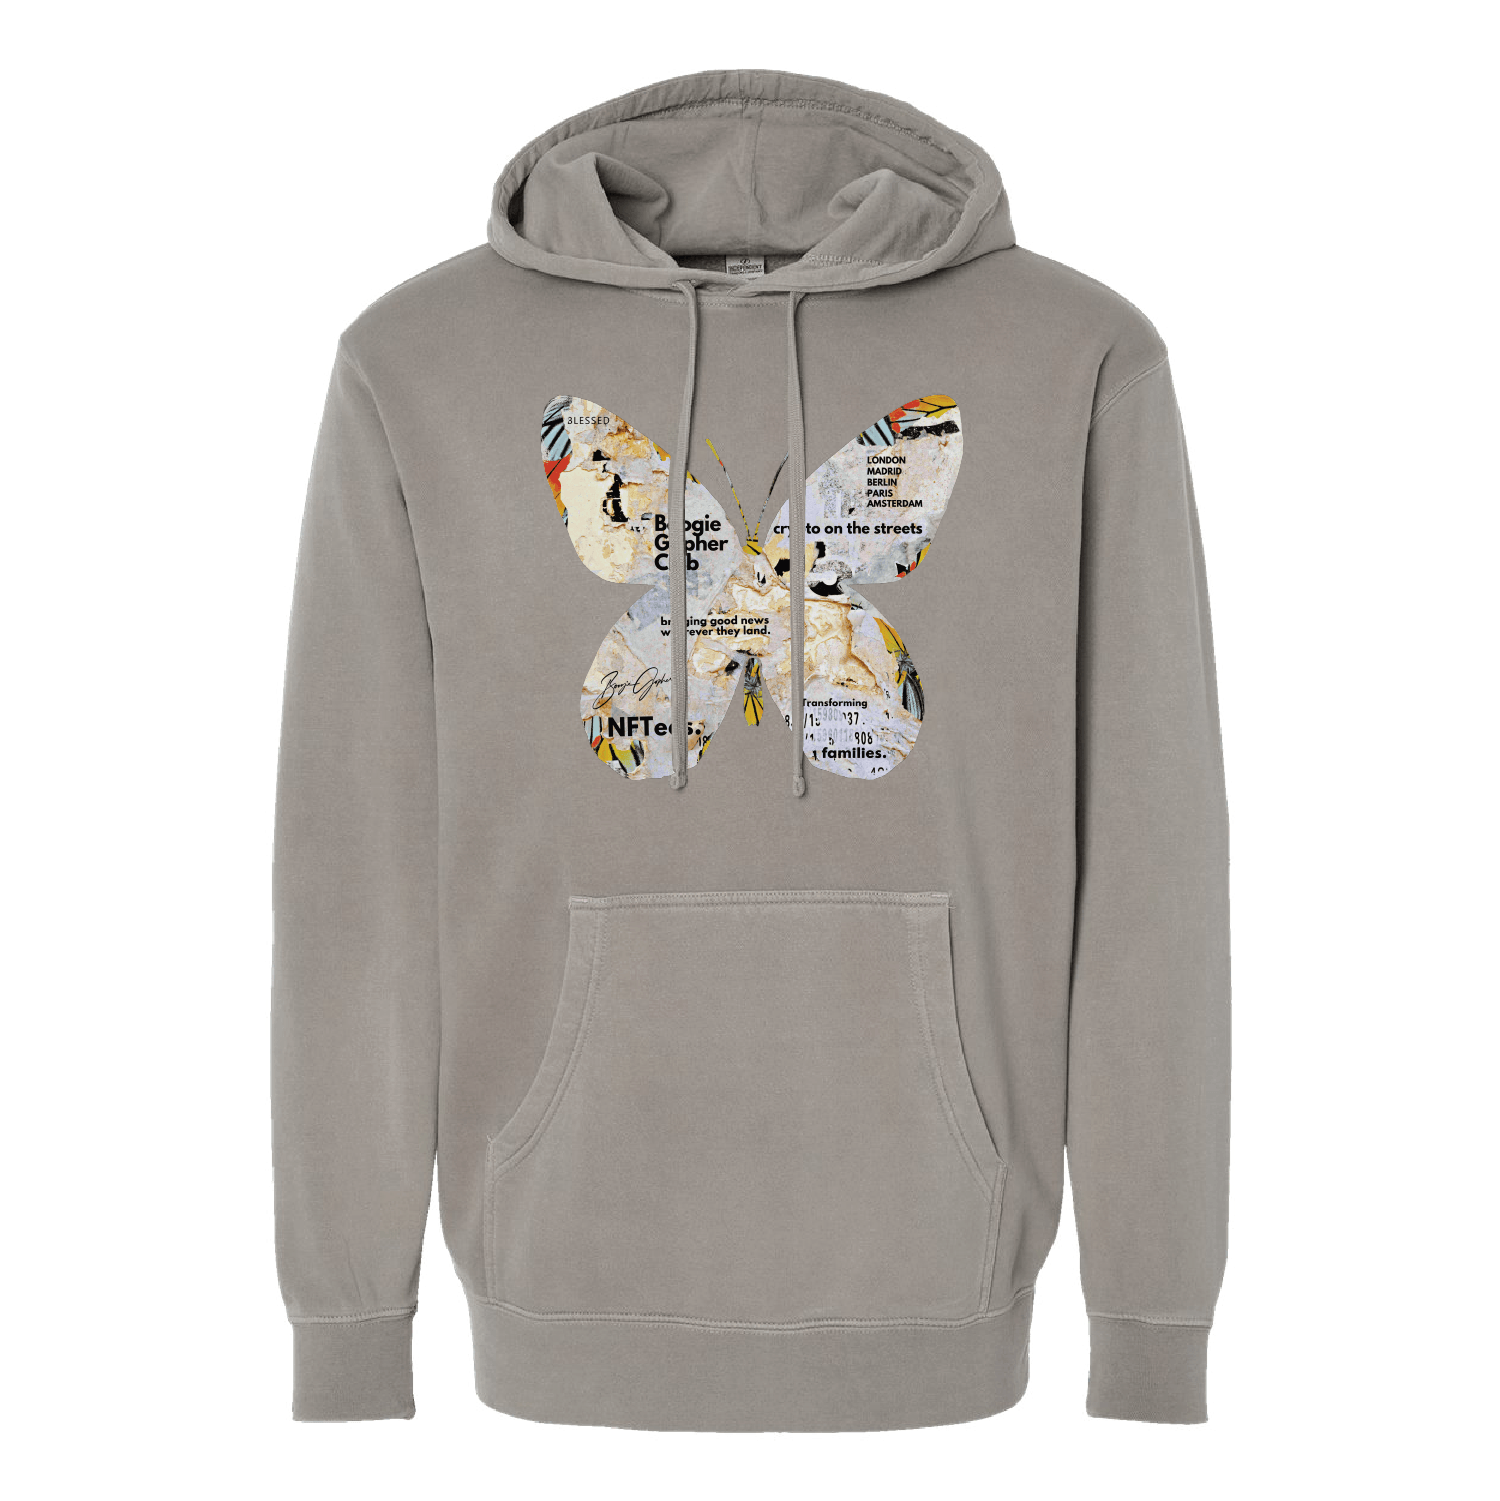 Boogie Gopher Butterfly Unisex Midweight Pigment-Dyed Hooded Sweatshirt - DSP On Demand